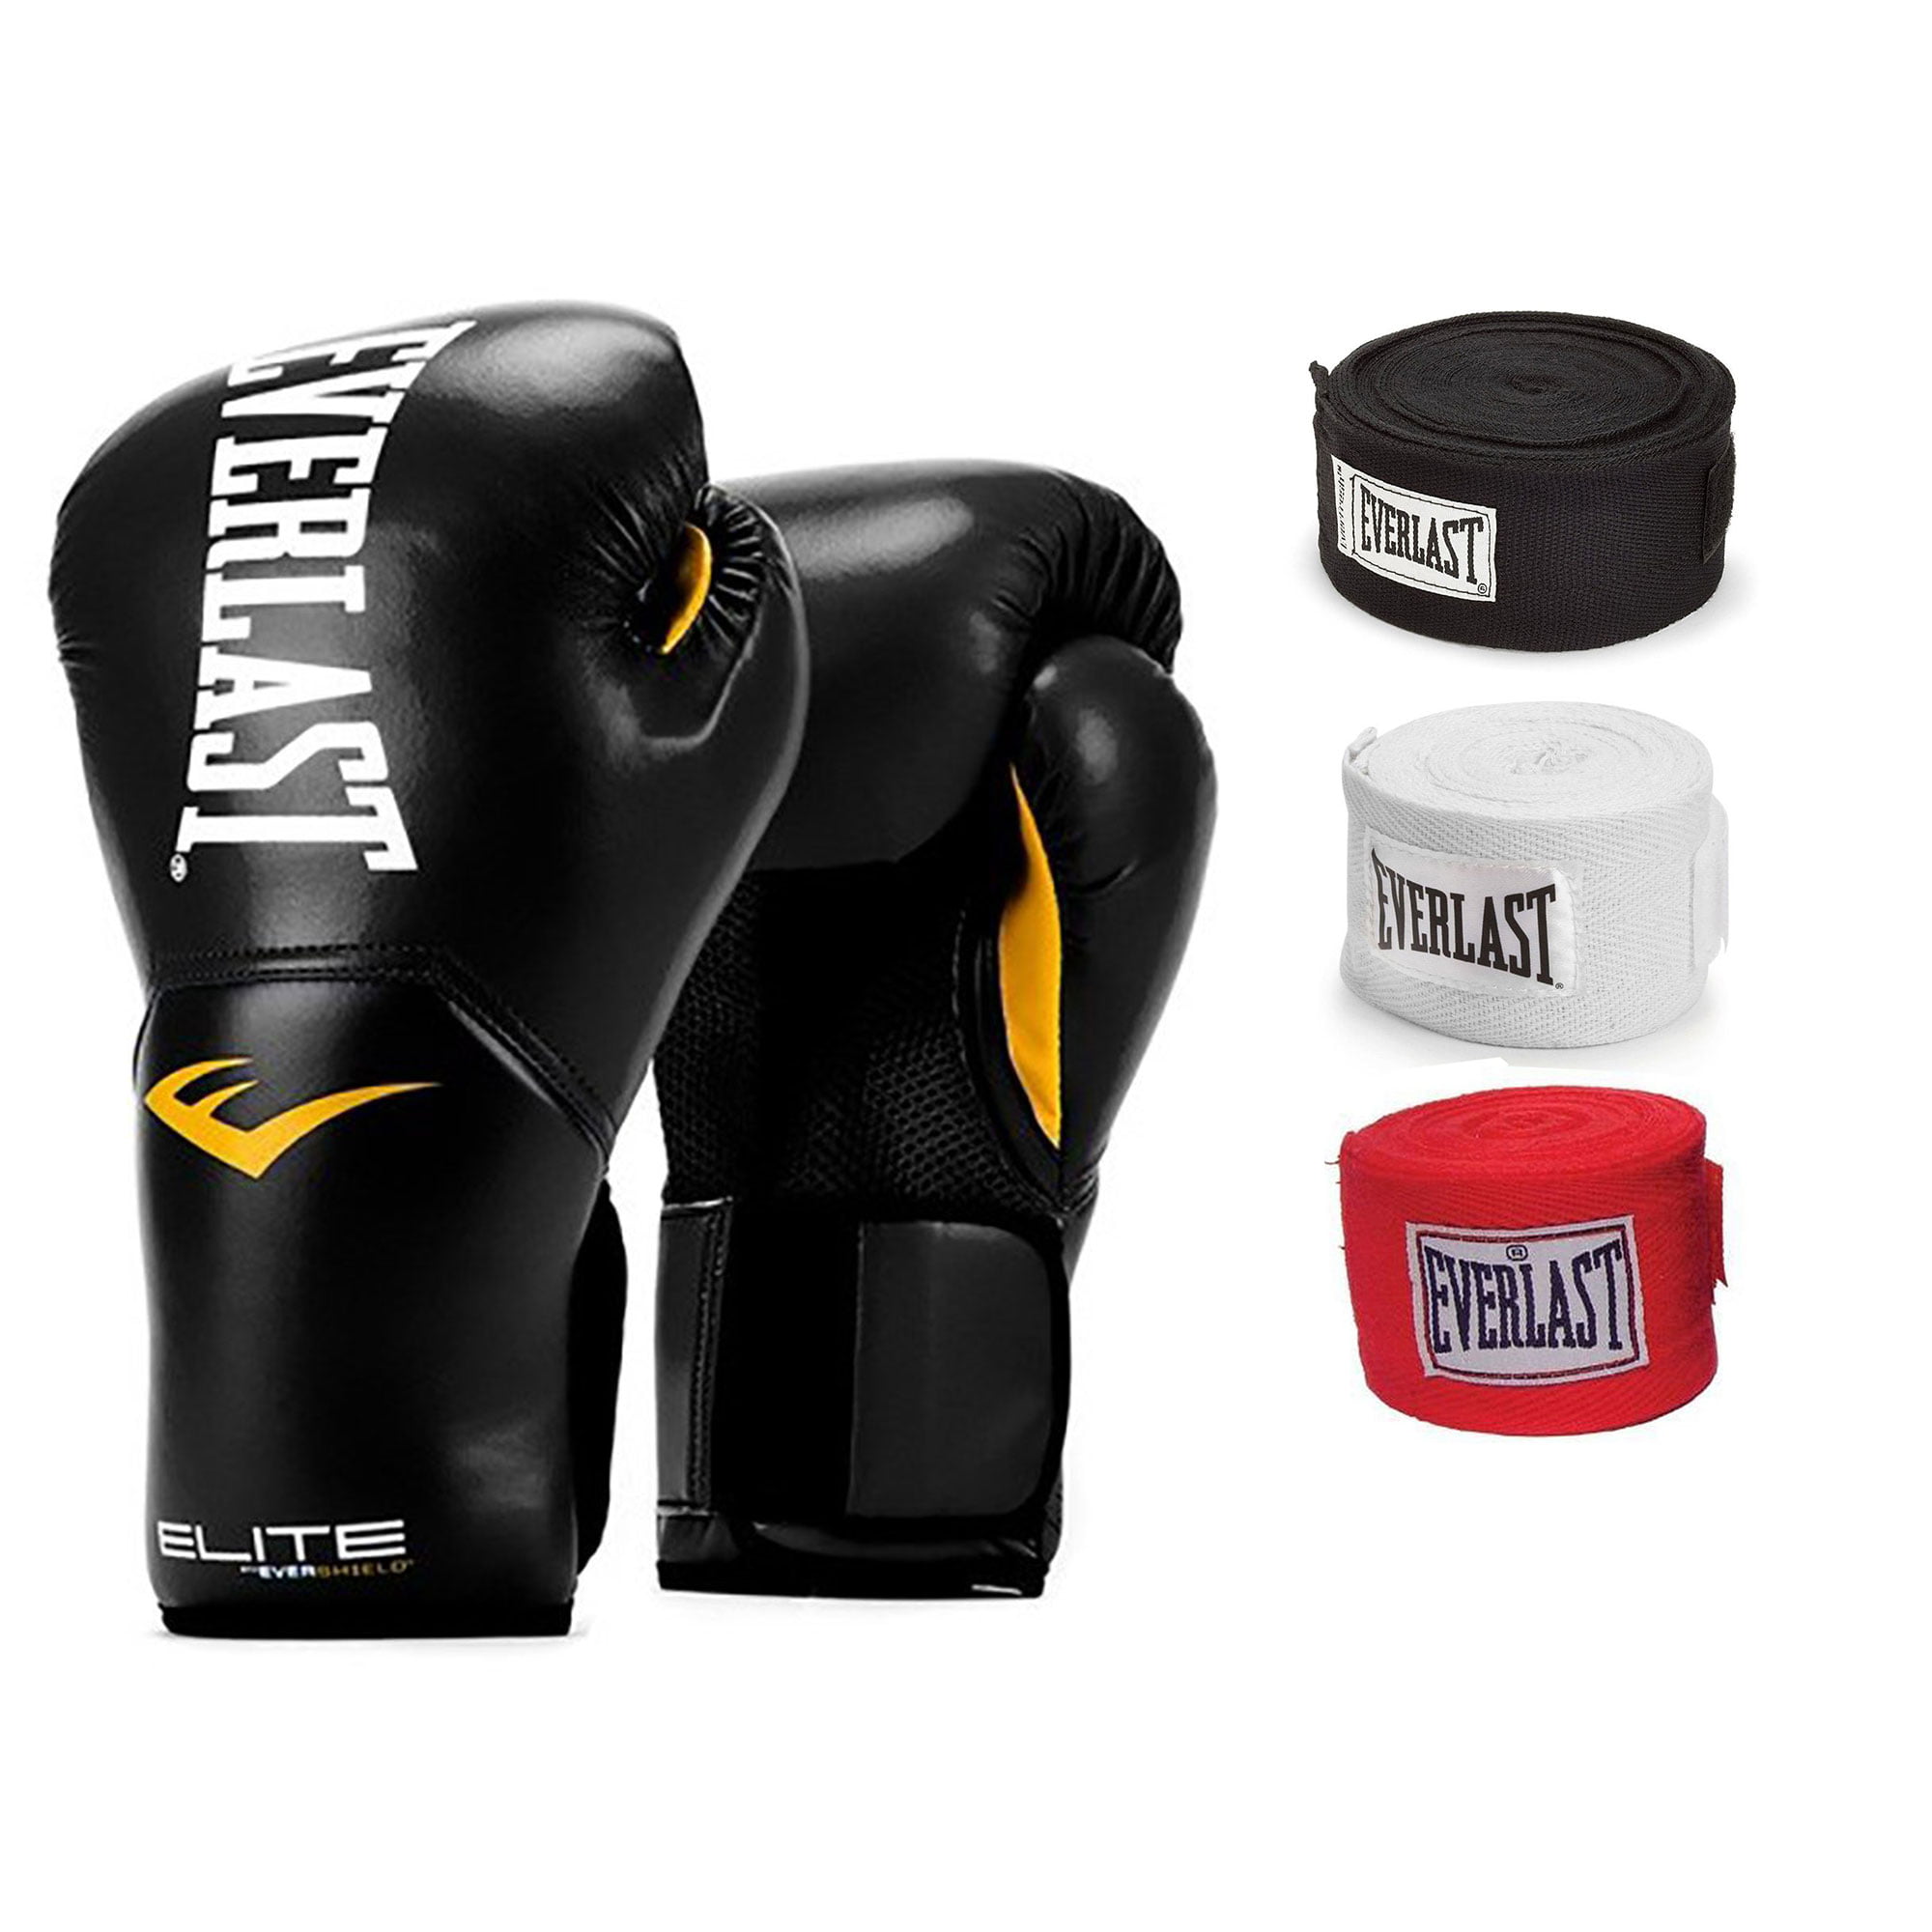 ProStyle Elite Heavy Bag Training Boxing Gloves Fight Punch Mitts 